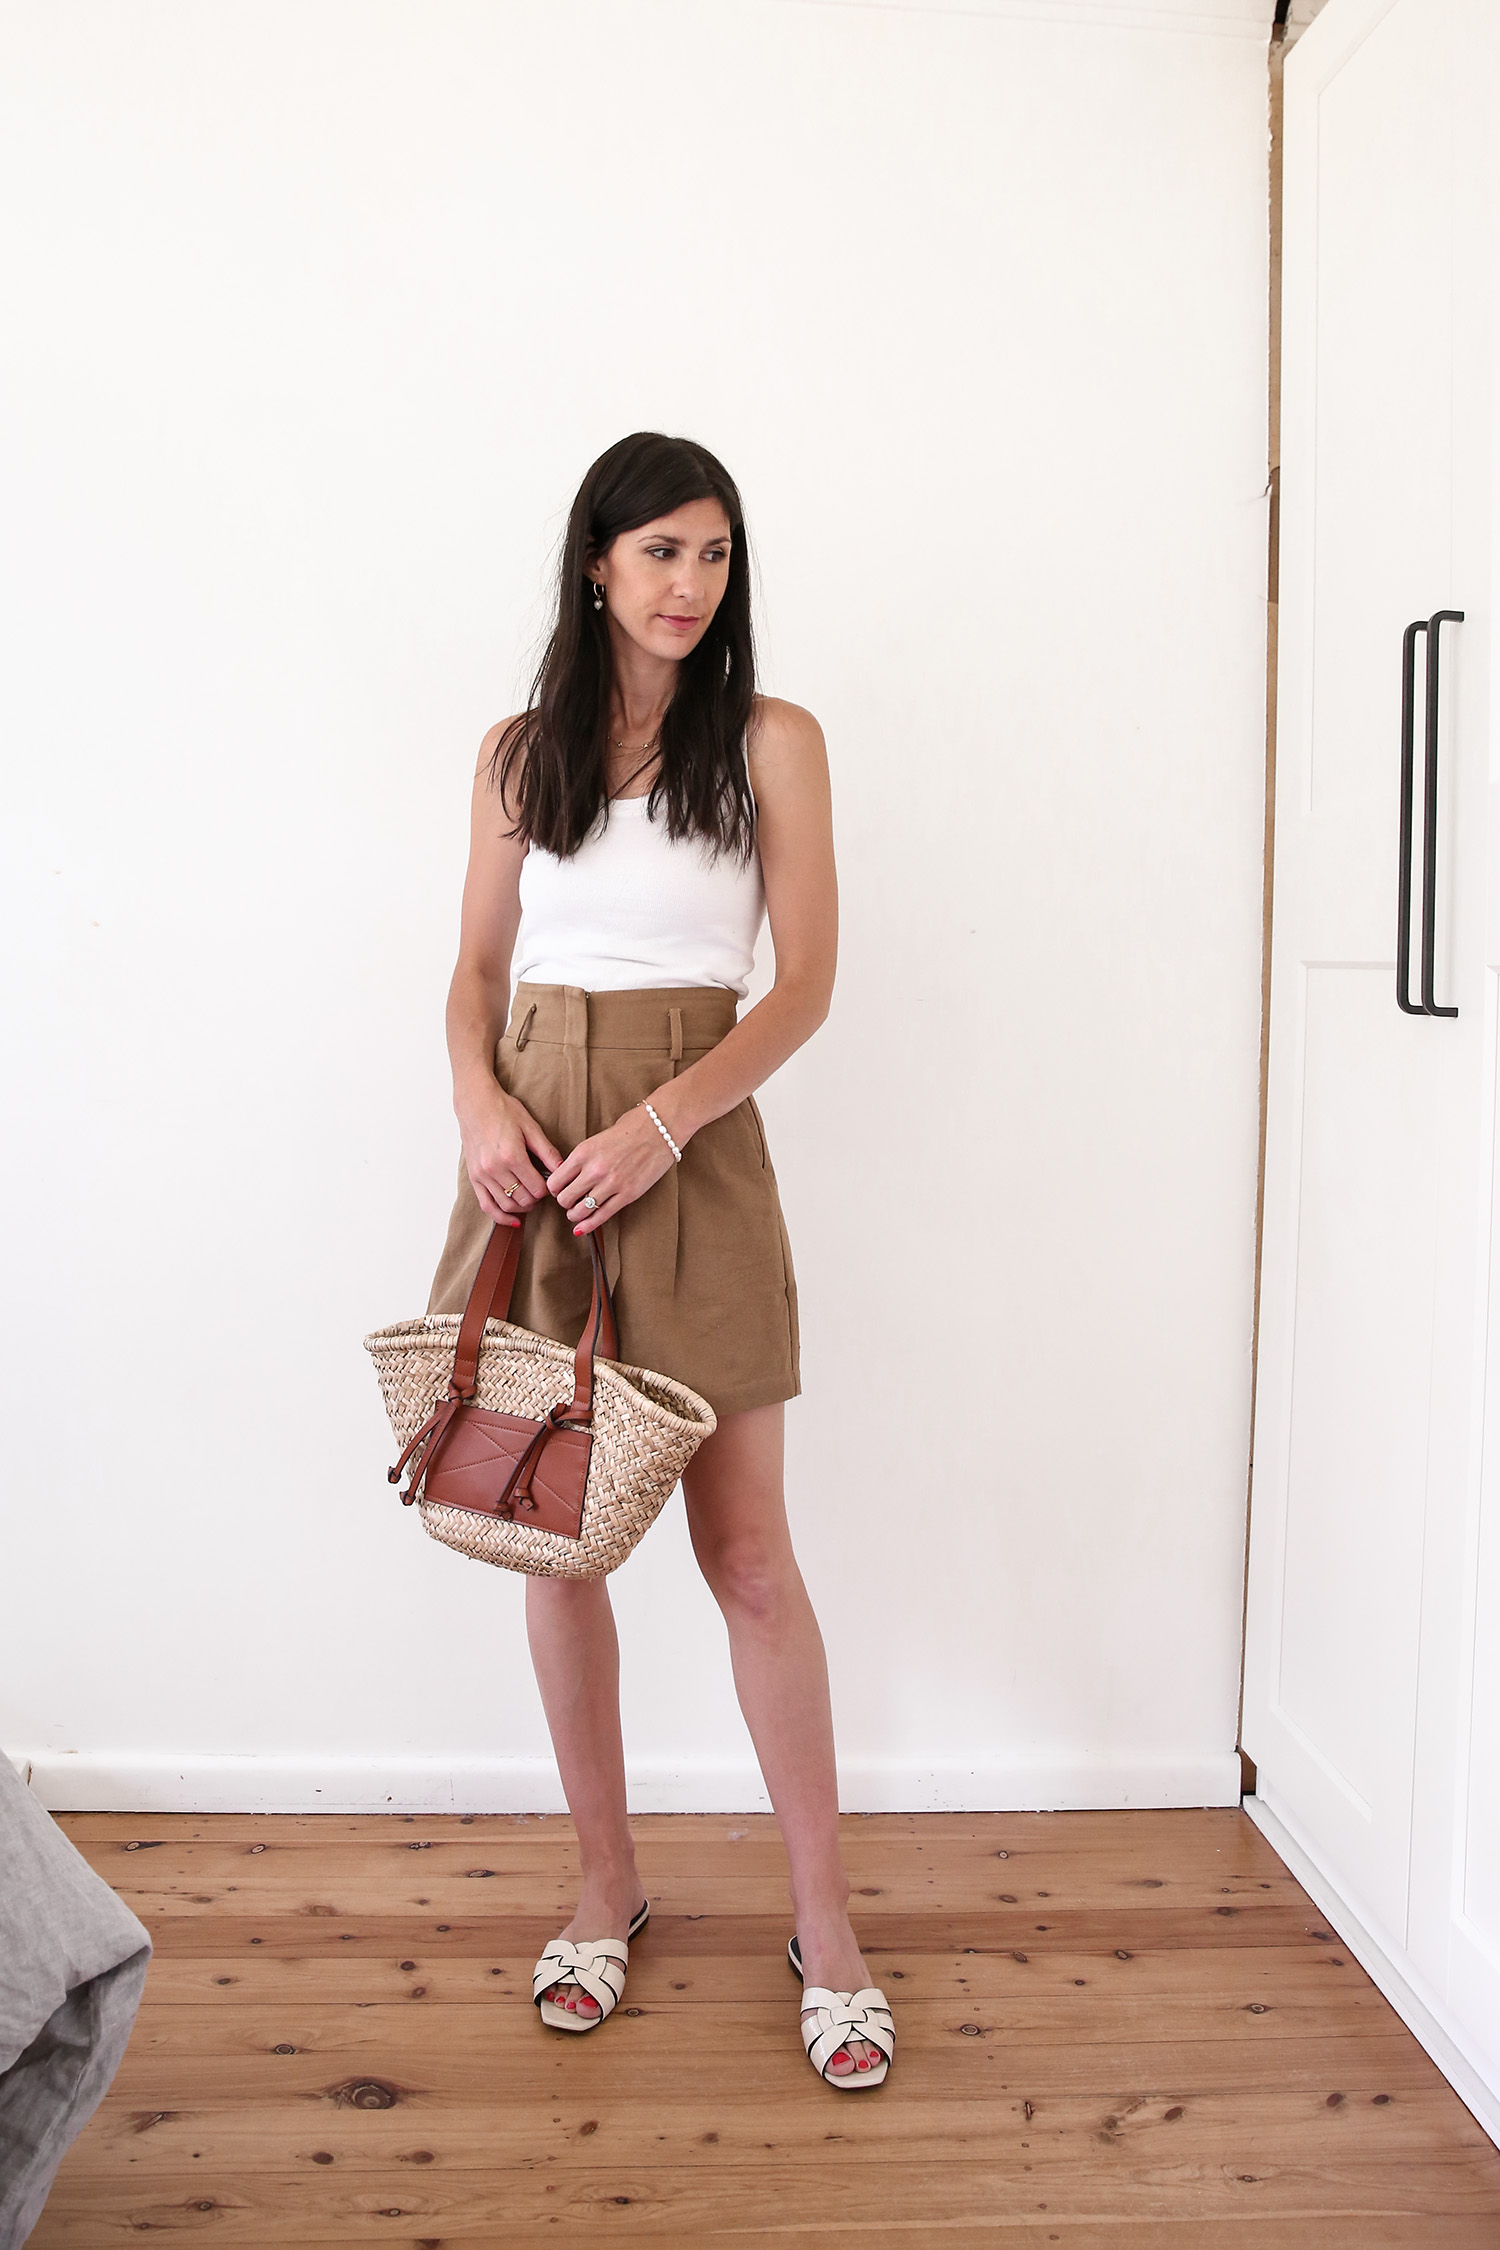 Repeating a summer outfit fave - Mademoiselle